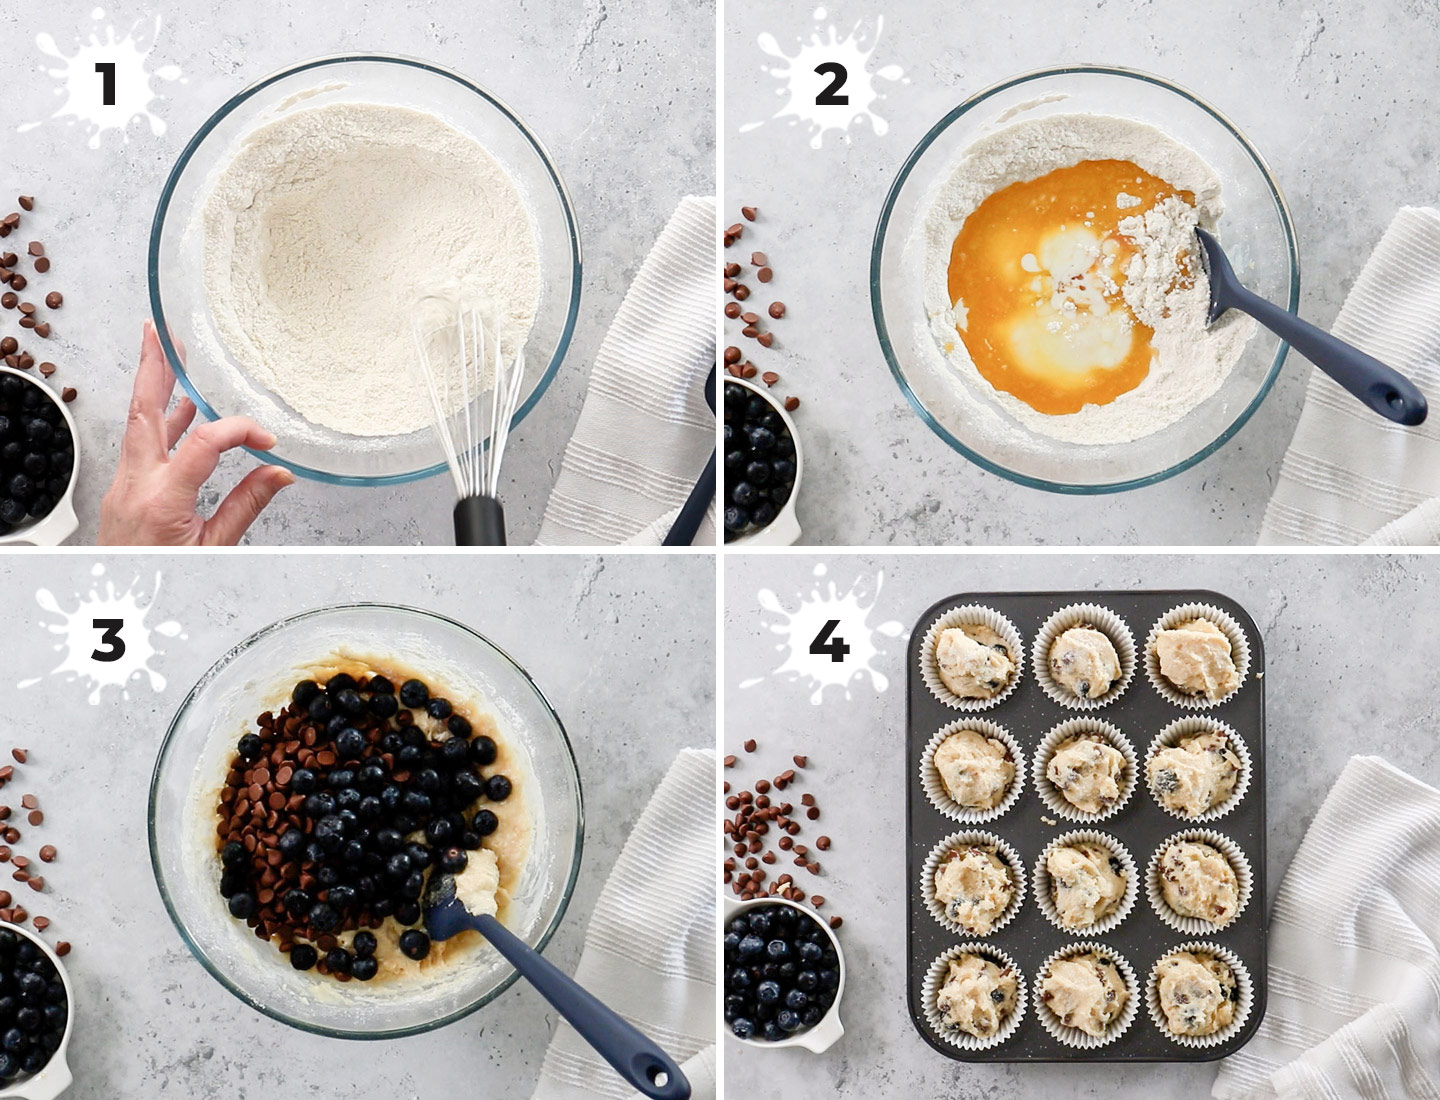 A collage showing how to make the blueberry chocolate chip muffins.